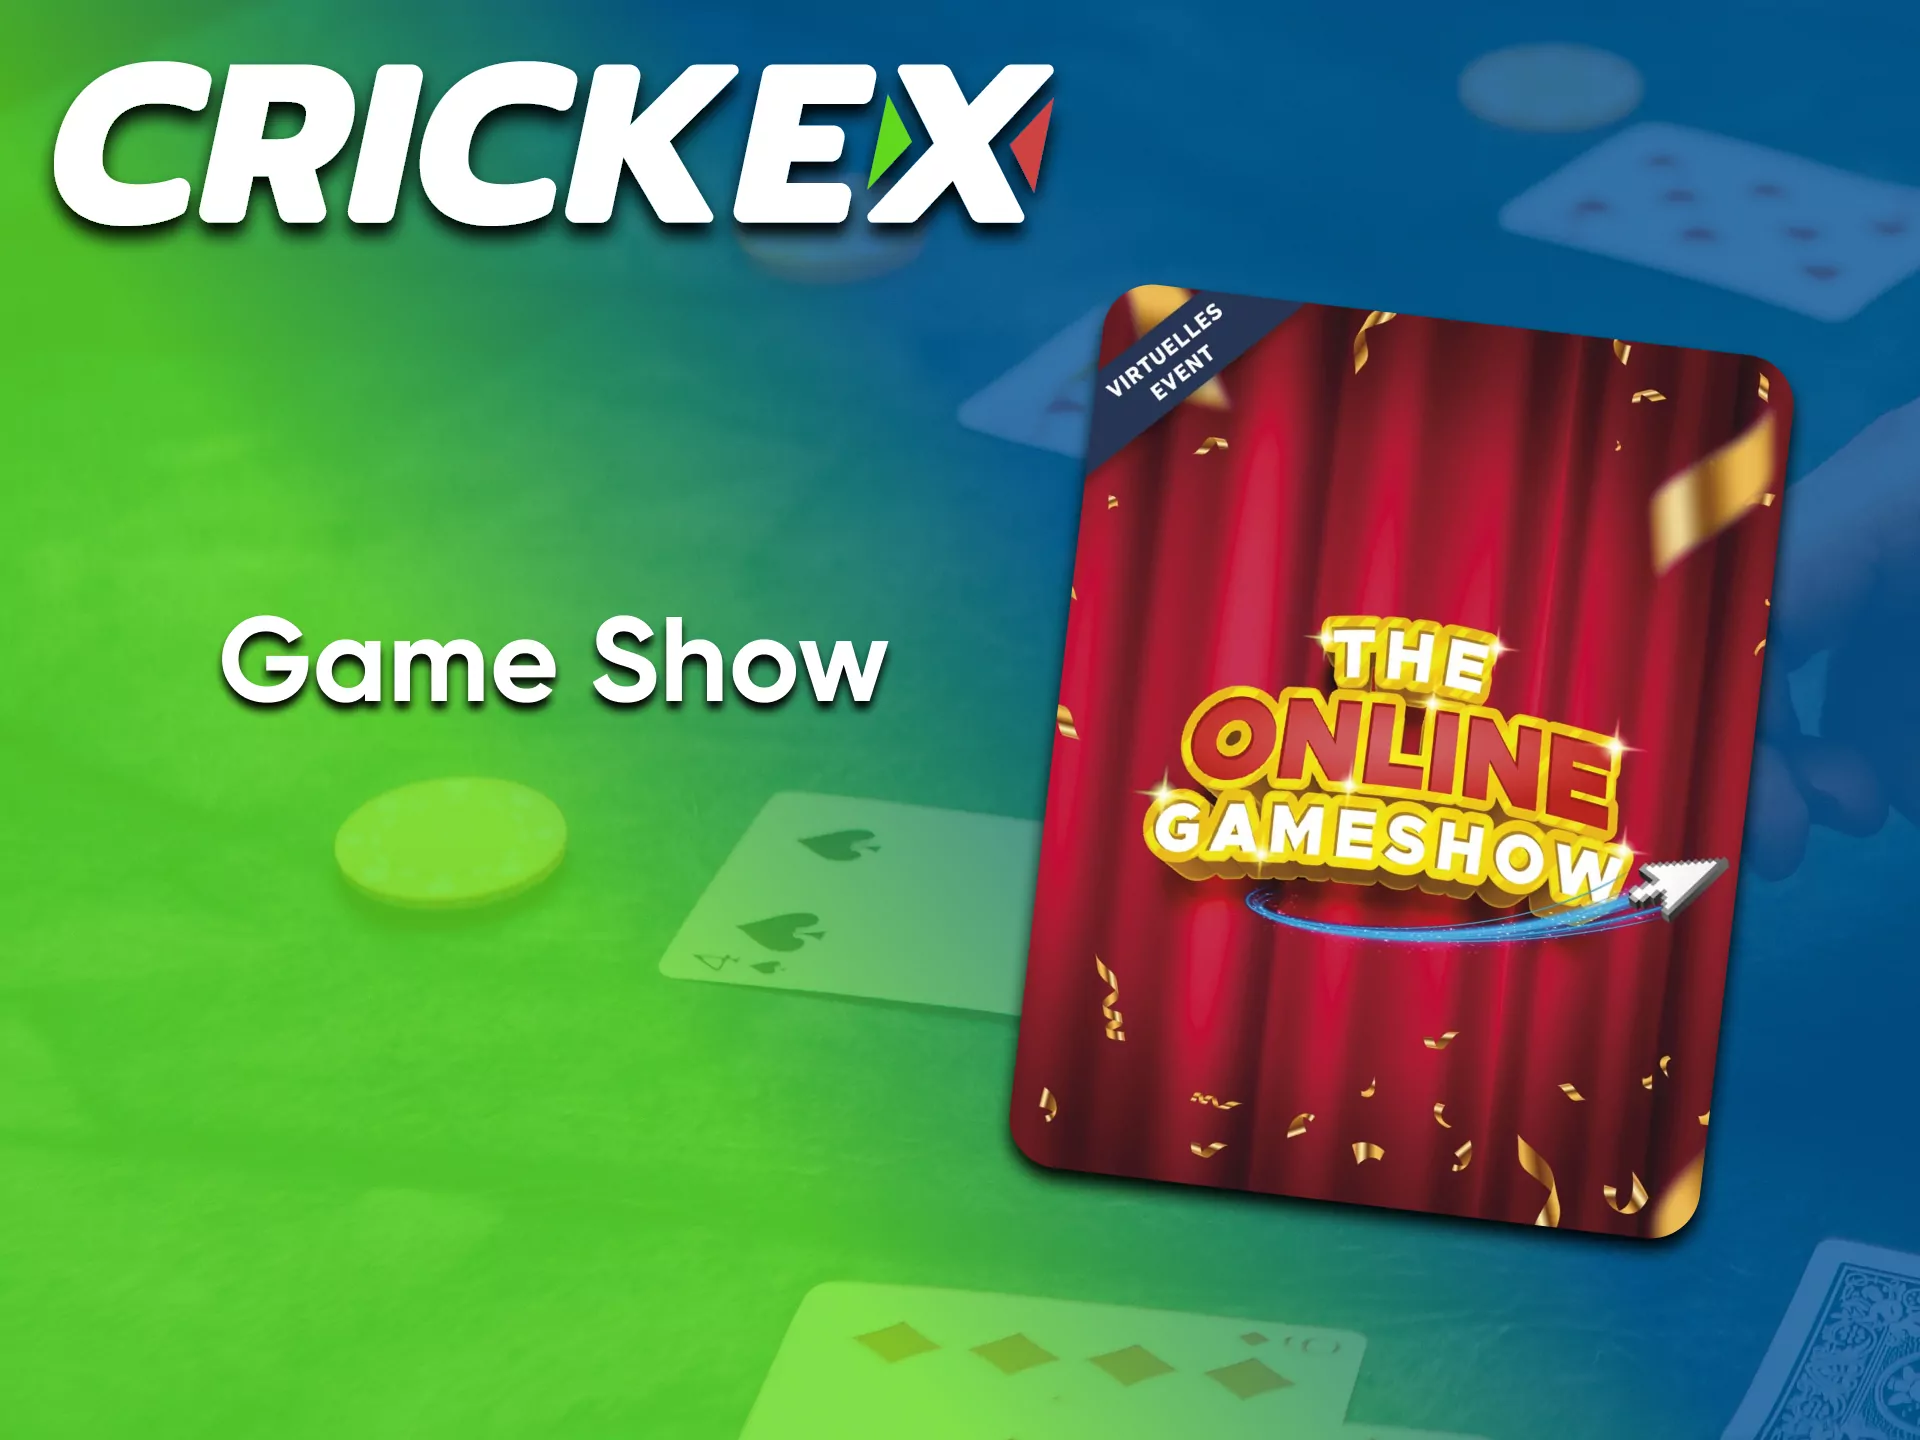 Game Show is one of the many games at Crickex casino.